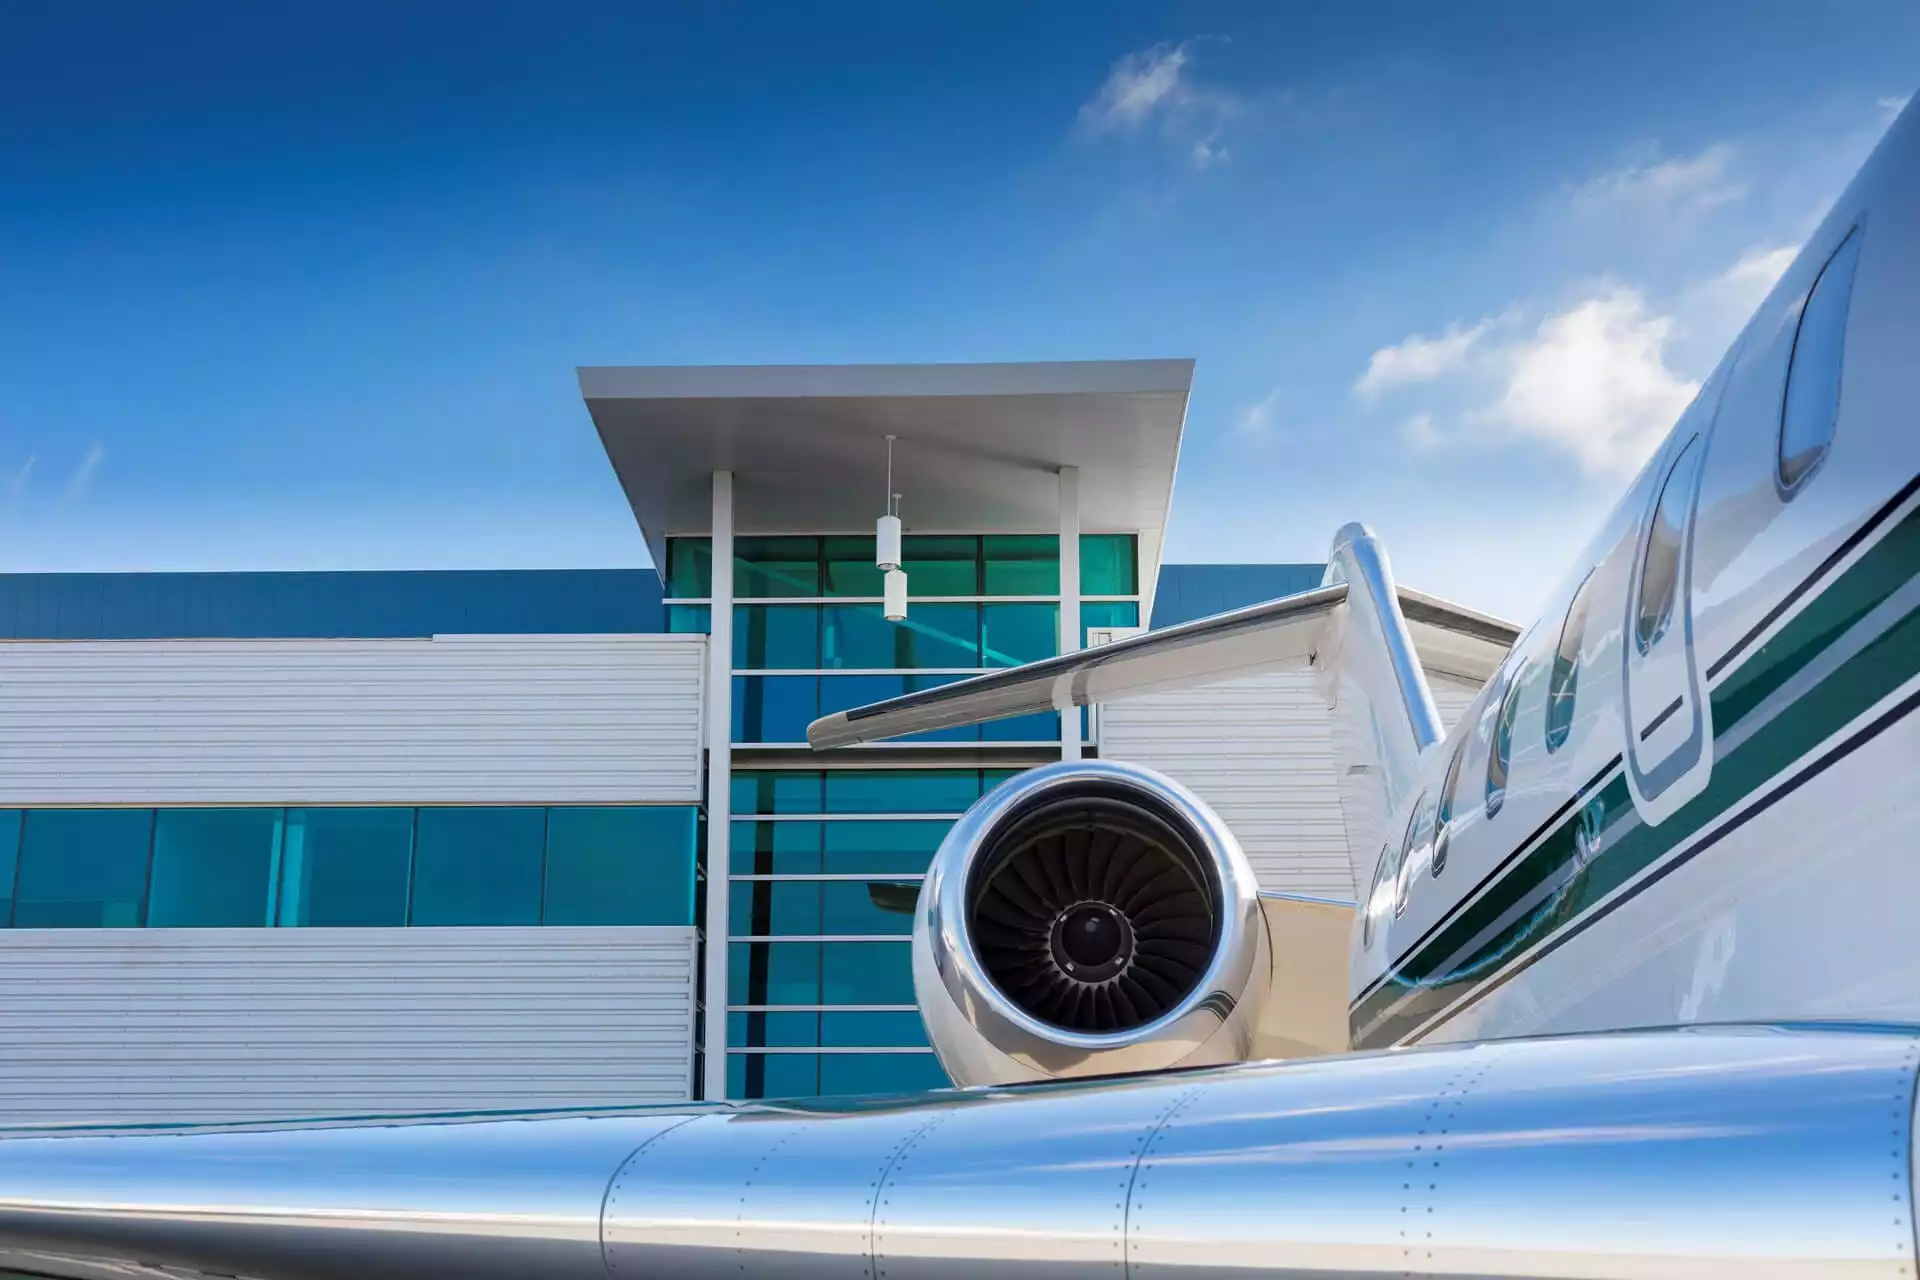 Private Jet in front of modern building